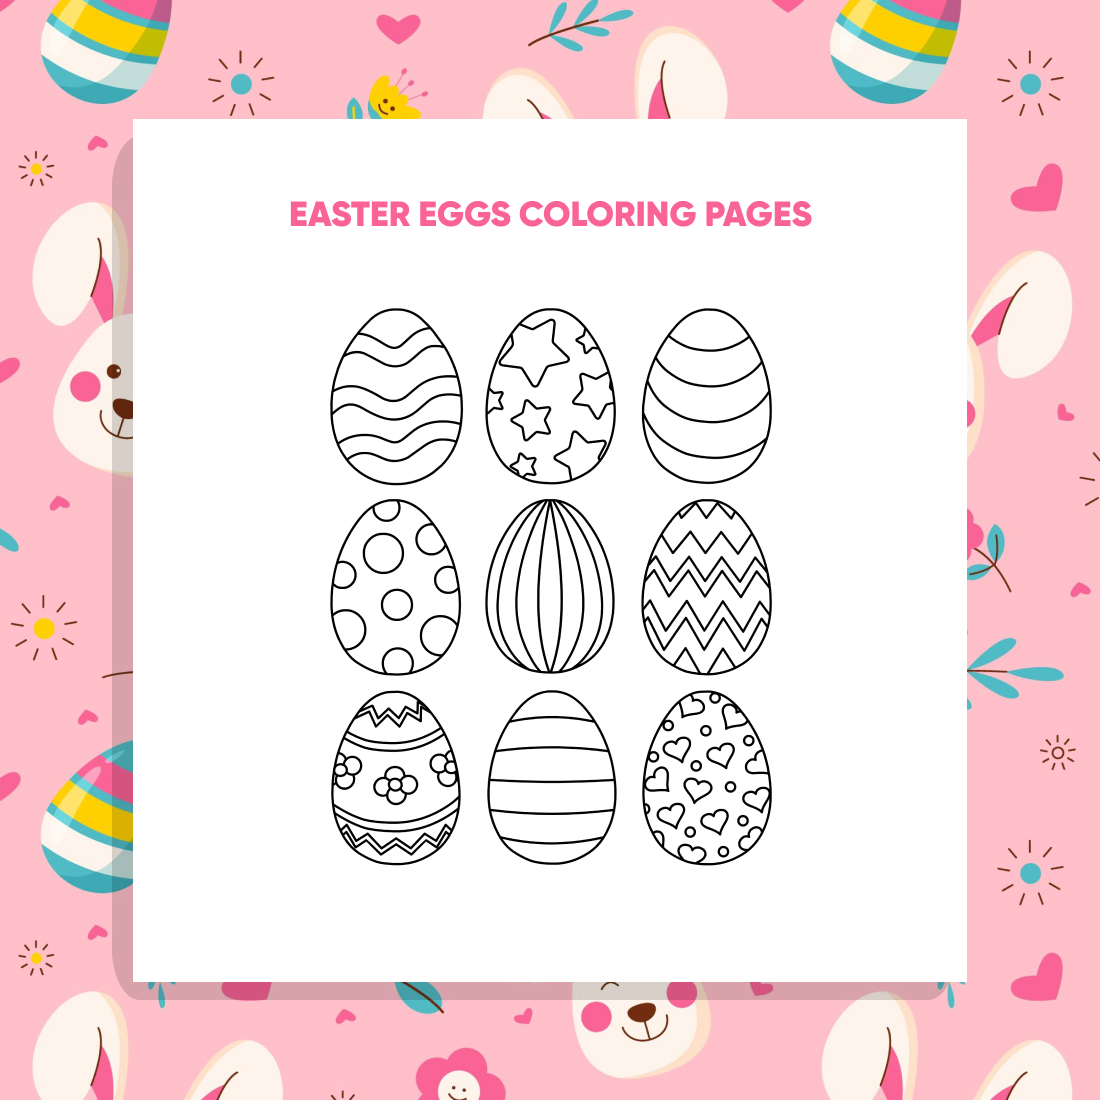 02. easter eggs coloring pages 1100 x 1100